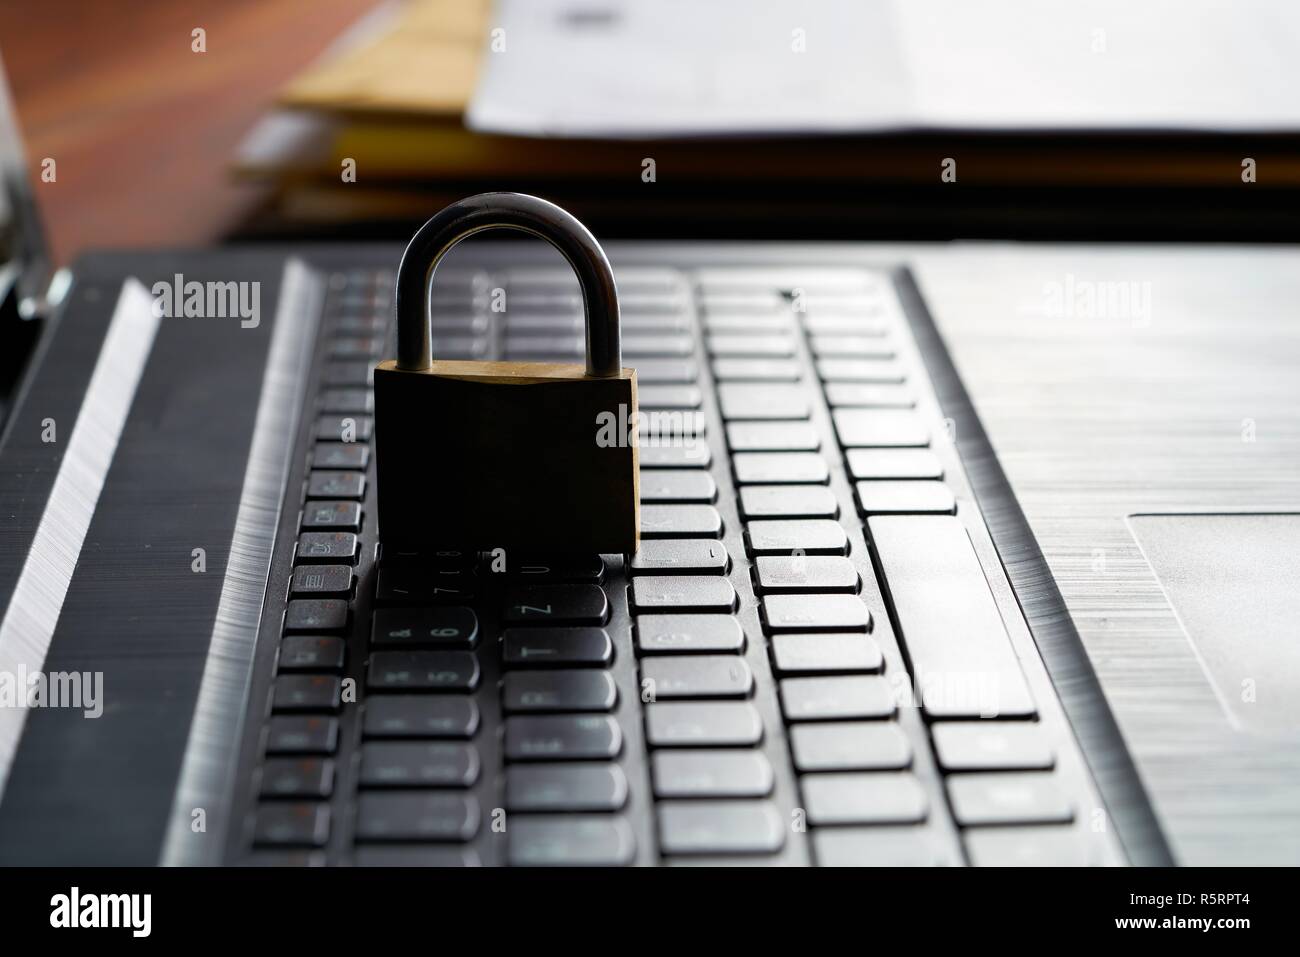 computer keyboard and padlock as a symbol of internet security Stock Photo